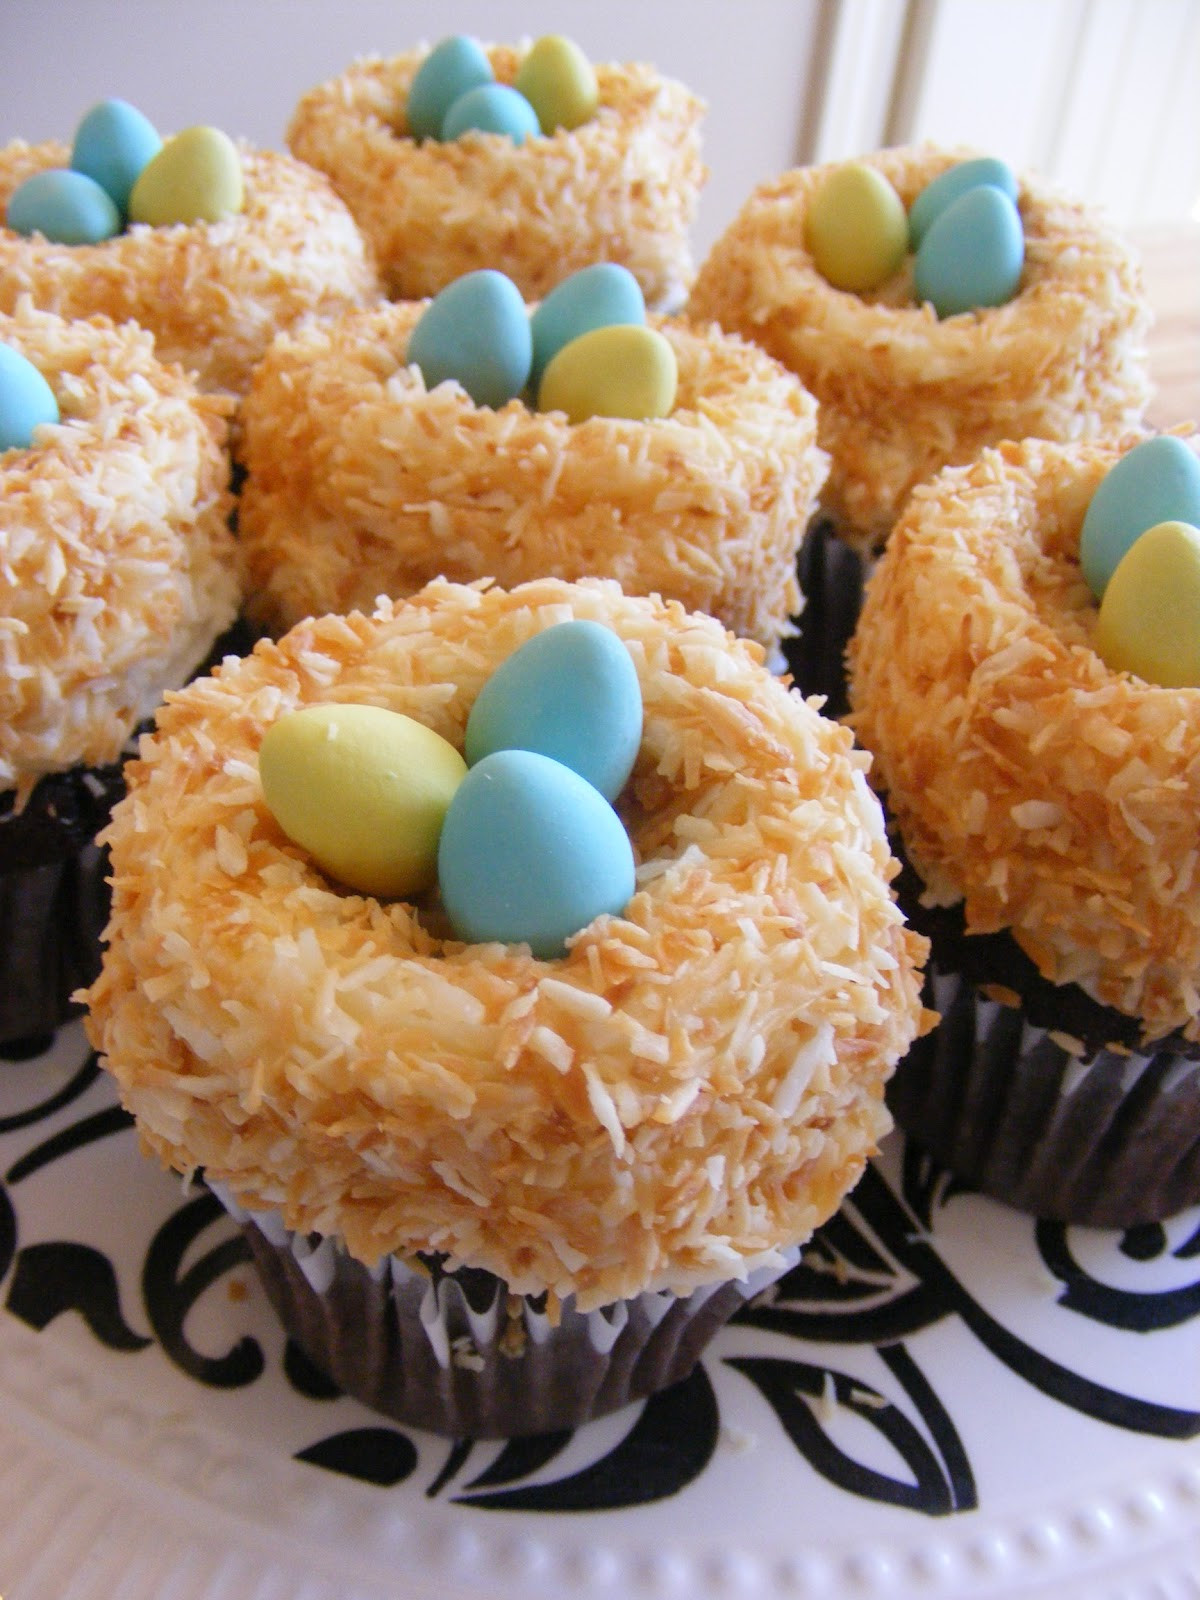 Cupcakes For Easter
 Two Super Easy Super Cute Cupcakes for Easter